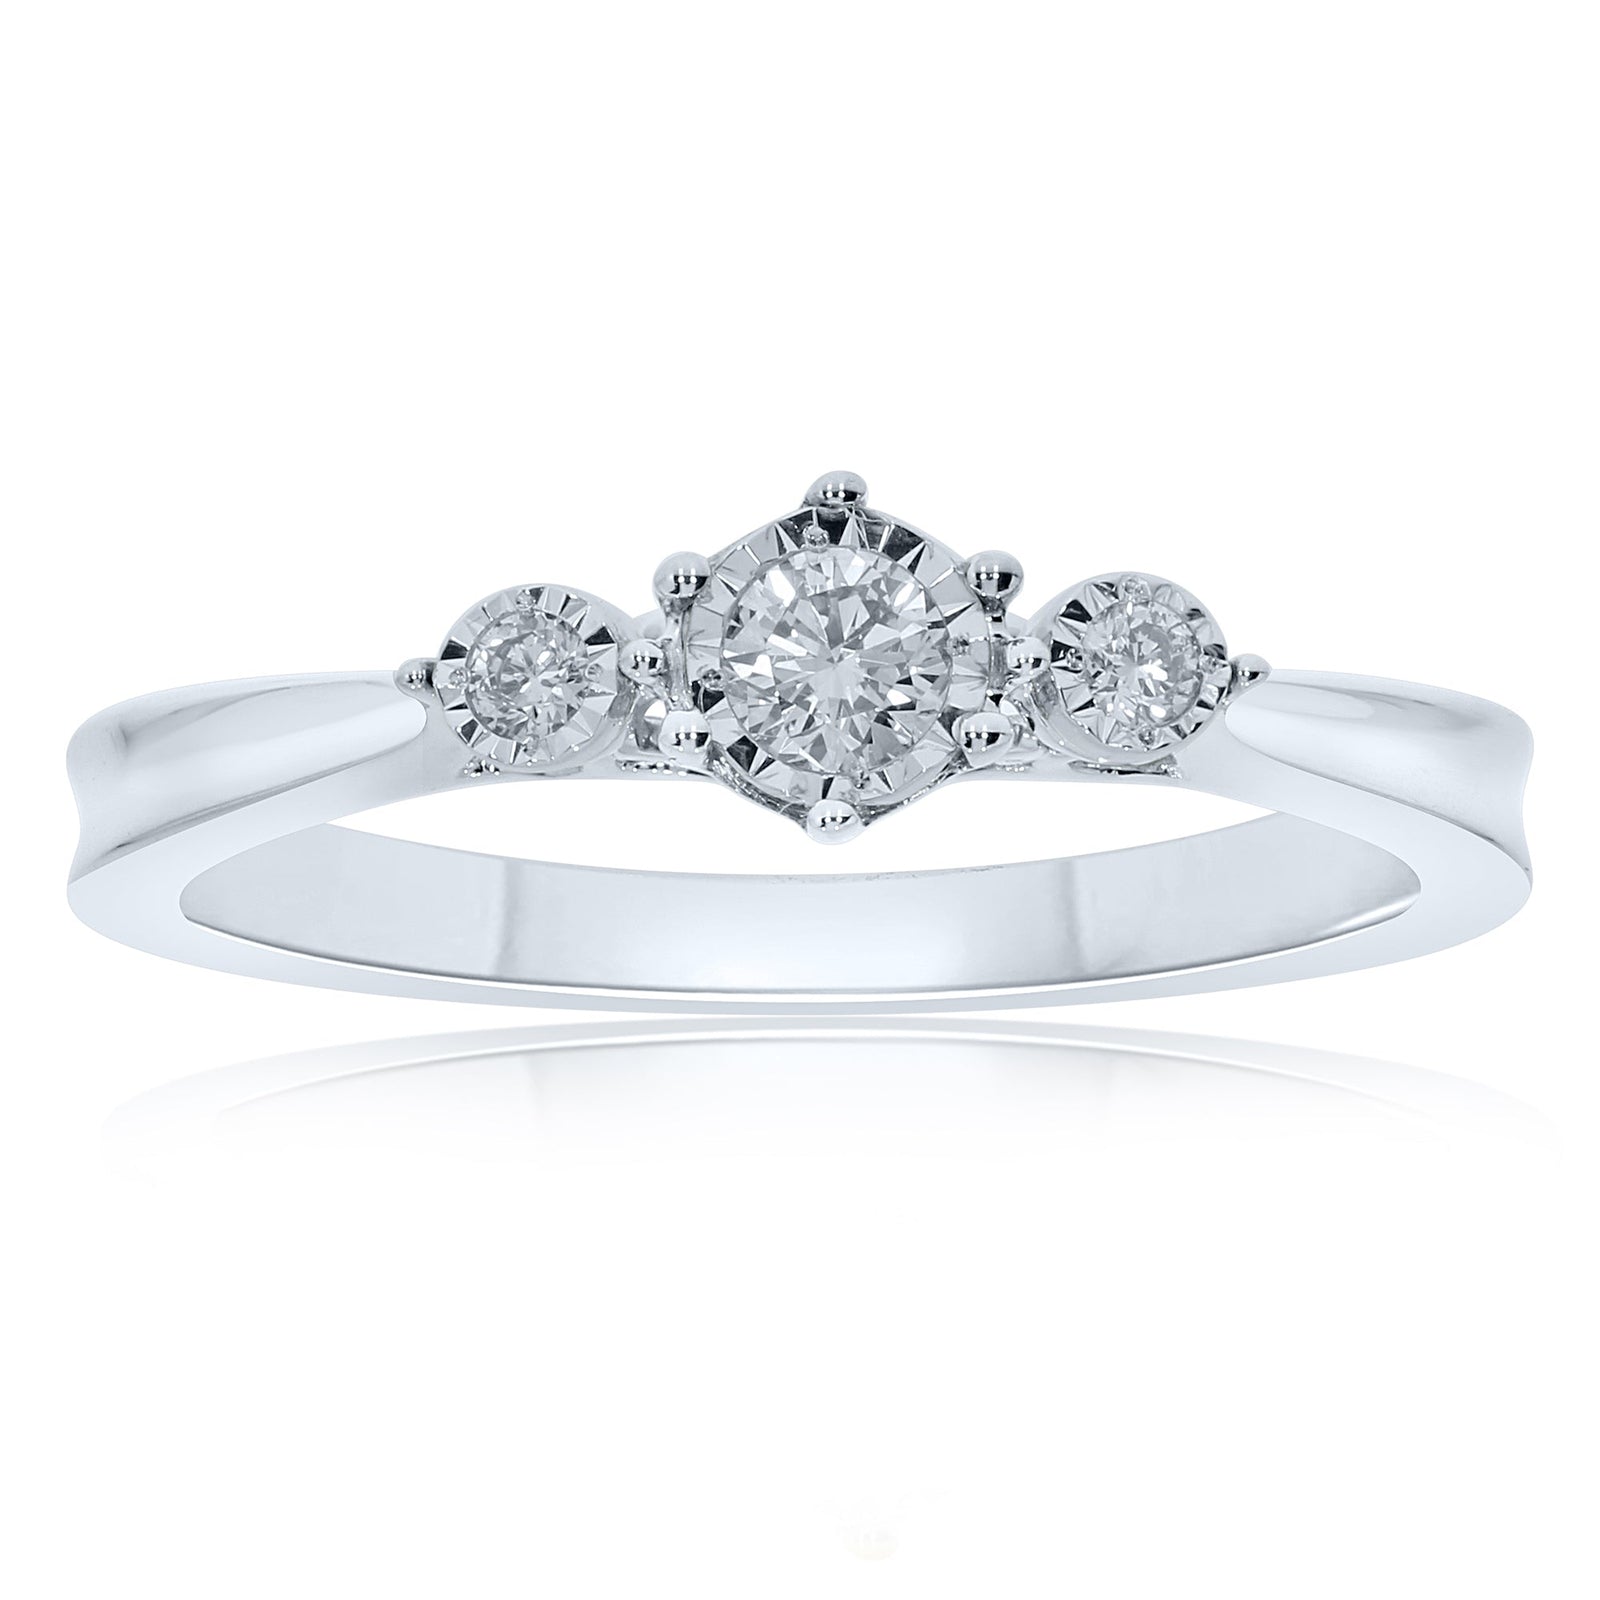 9ct white gold 3 stone miracle plate diamond ring 0.15ct